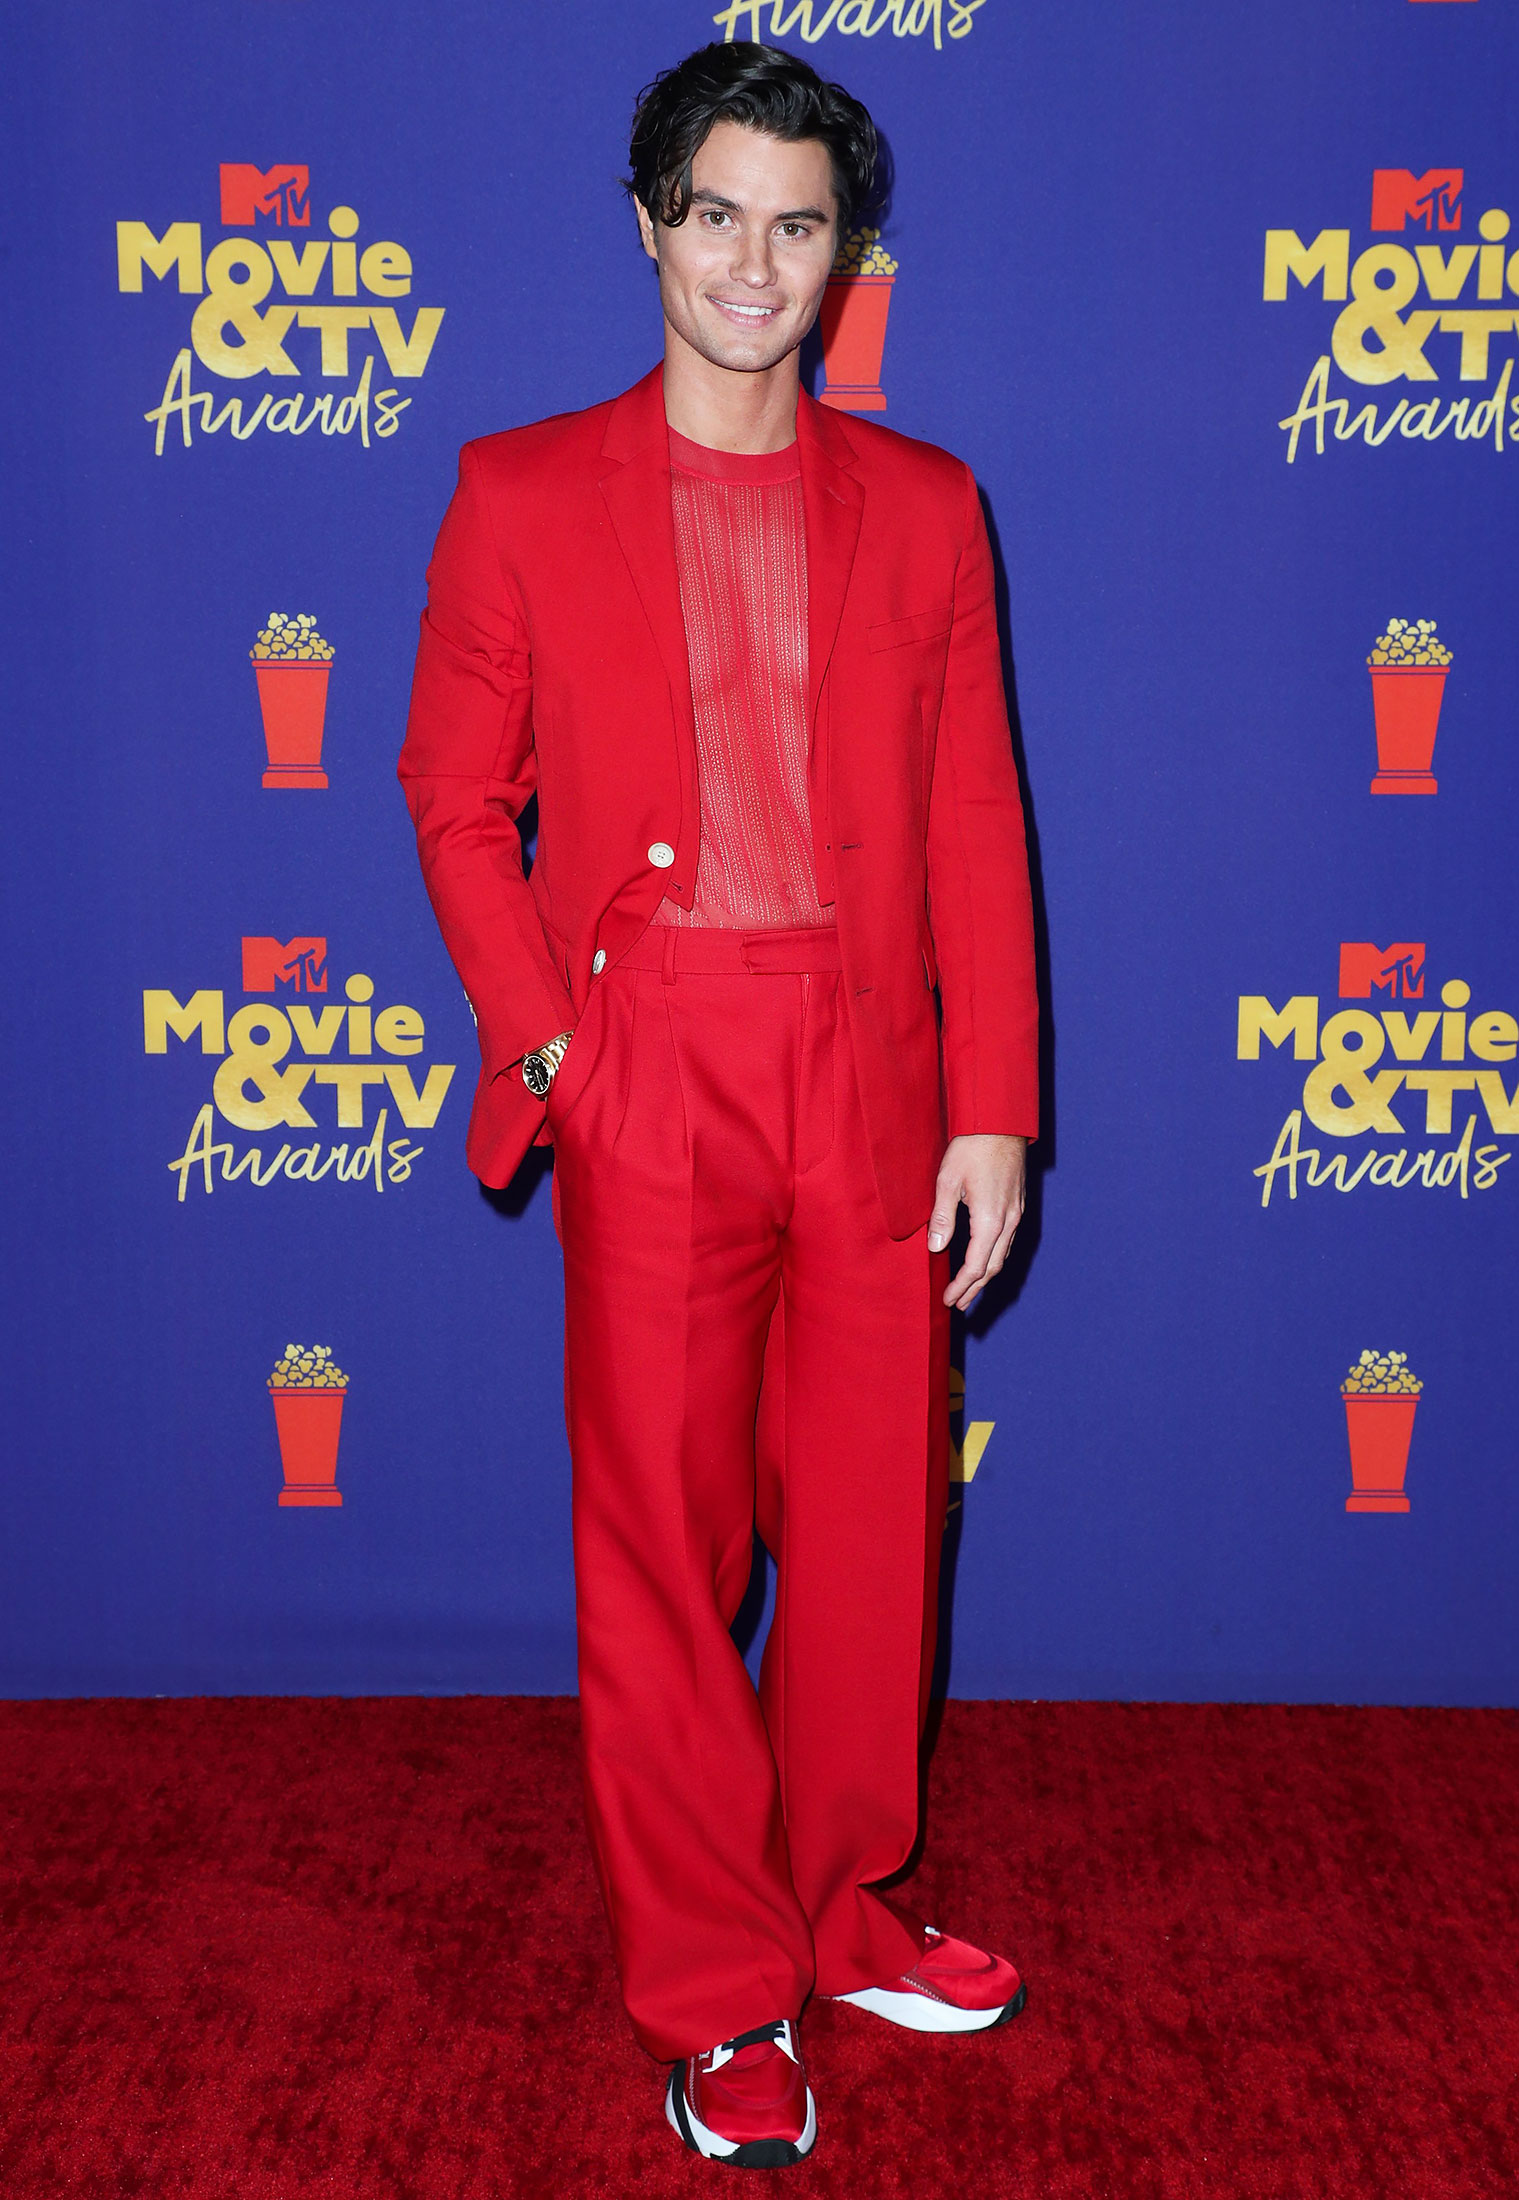 Mtv Movie Tv Awards 21 Hottest Men In Tuxedos Suits